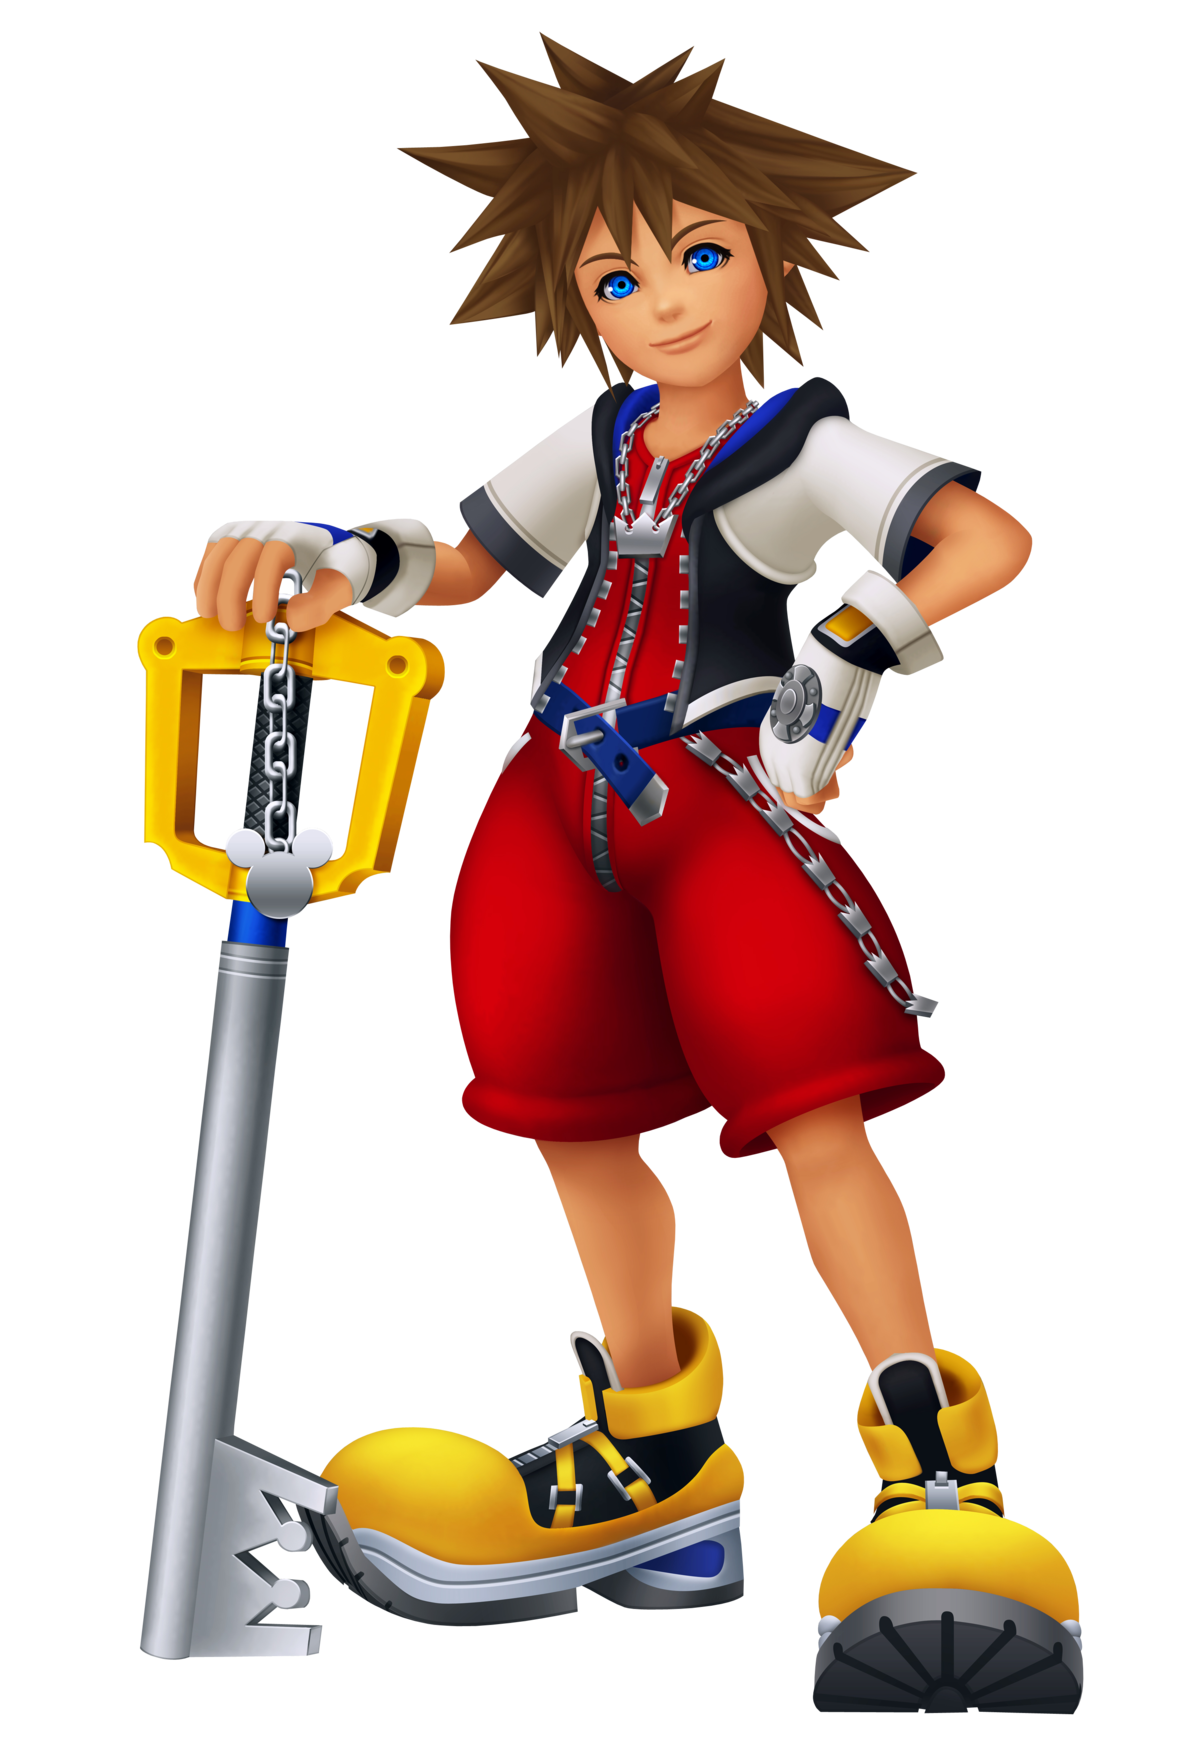 Sora Ngnl Fan Art Sora is a tall and thin person with spiky black hair ...